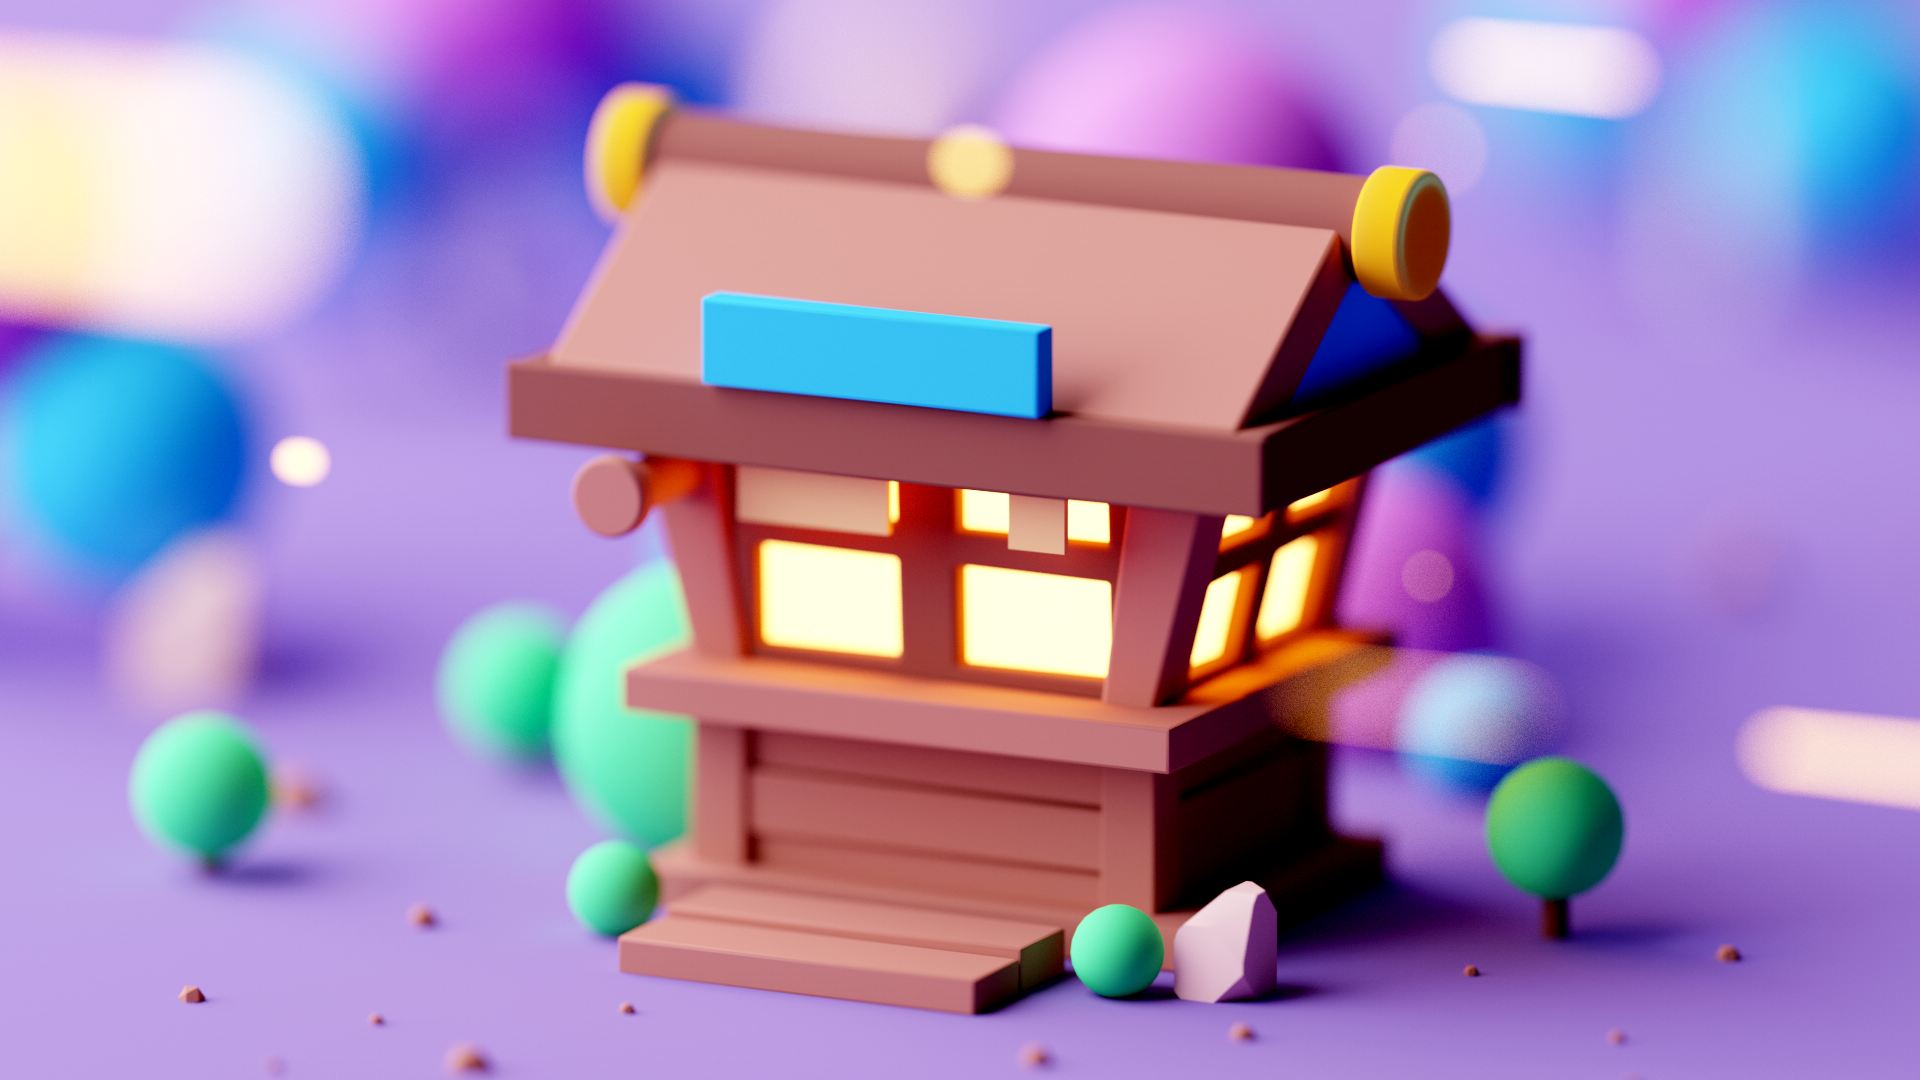 Game buildings #2 on Behance3a64ab77378475.5c8b02a68afbd.png